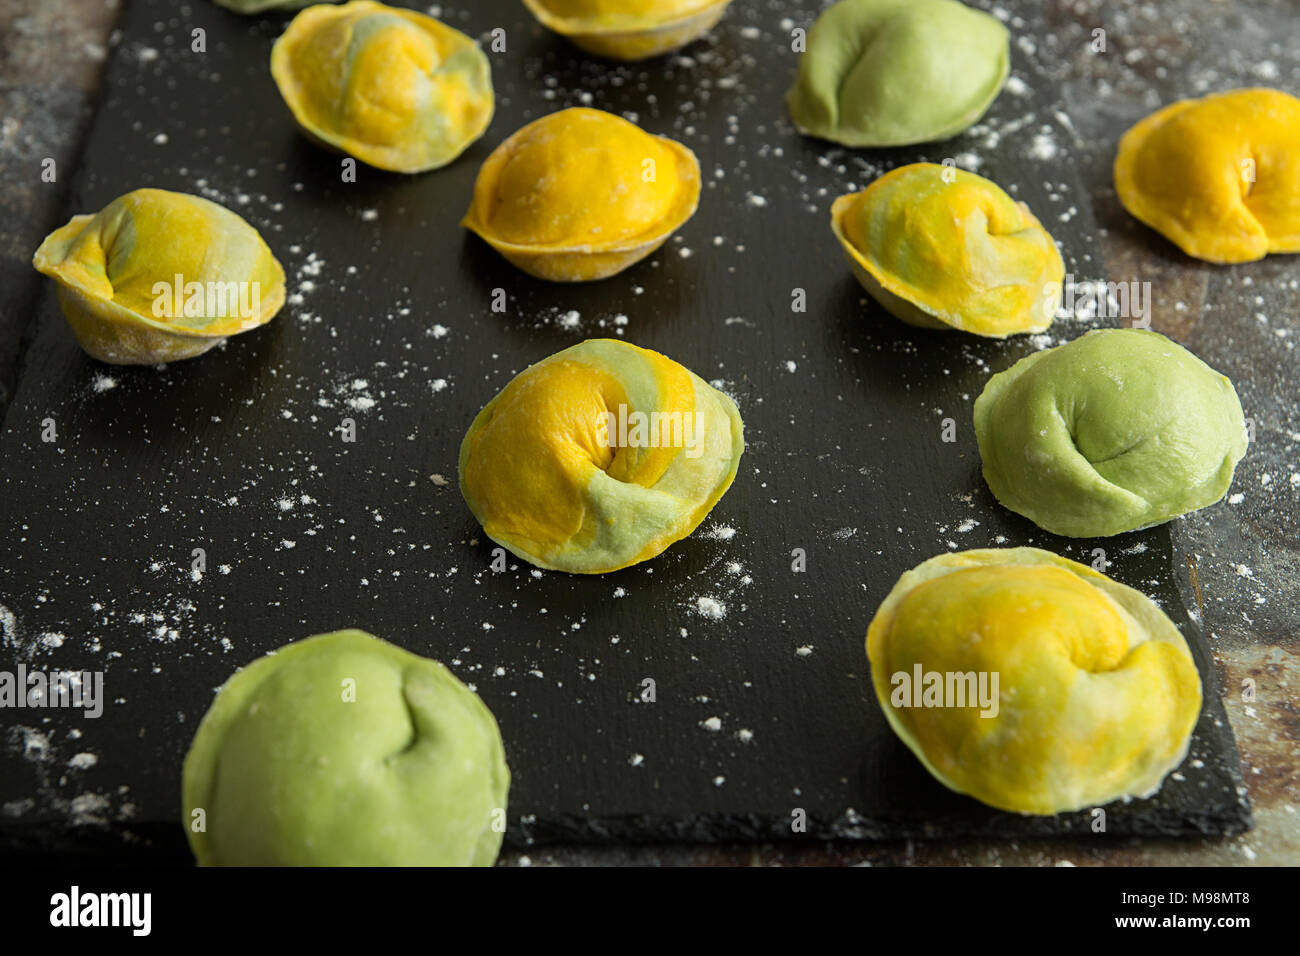 Homemade raw dumpling, yellow and green colors, traditional East European food before boiling. Top view. Stock Photo